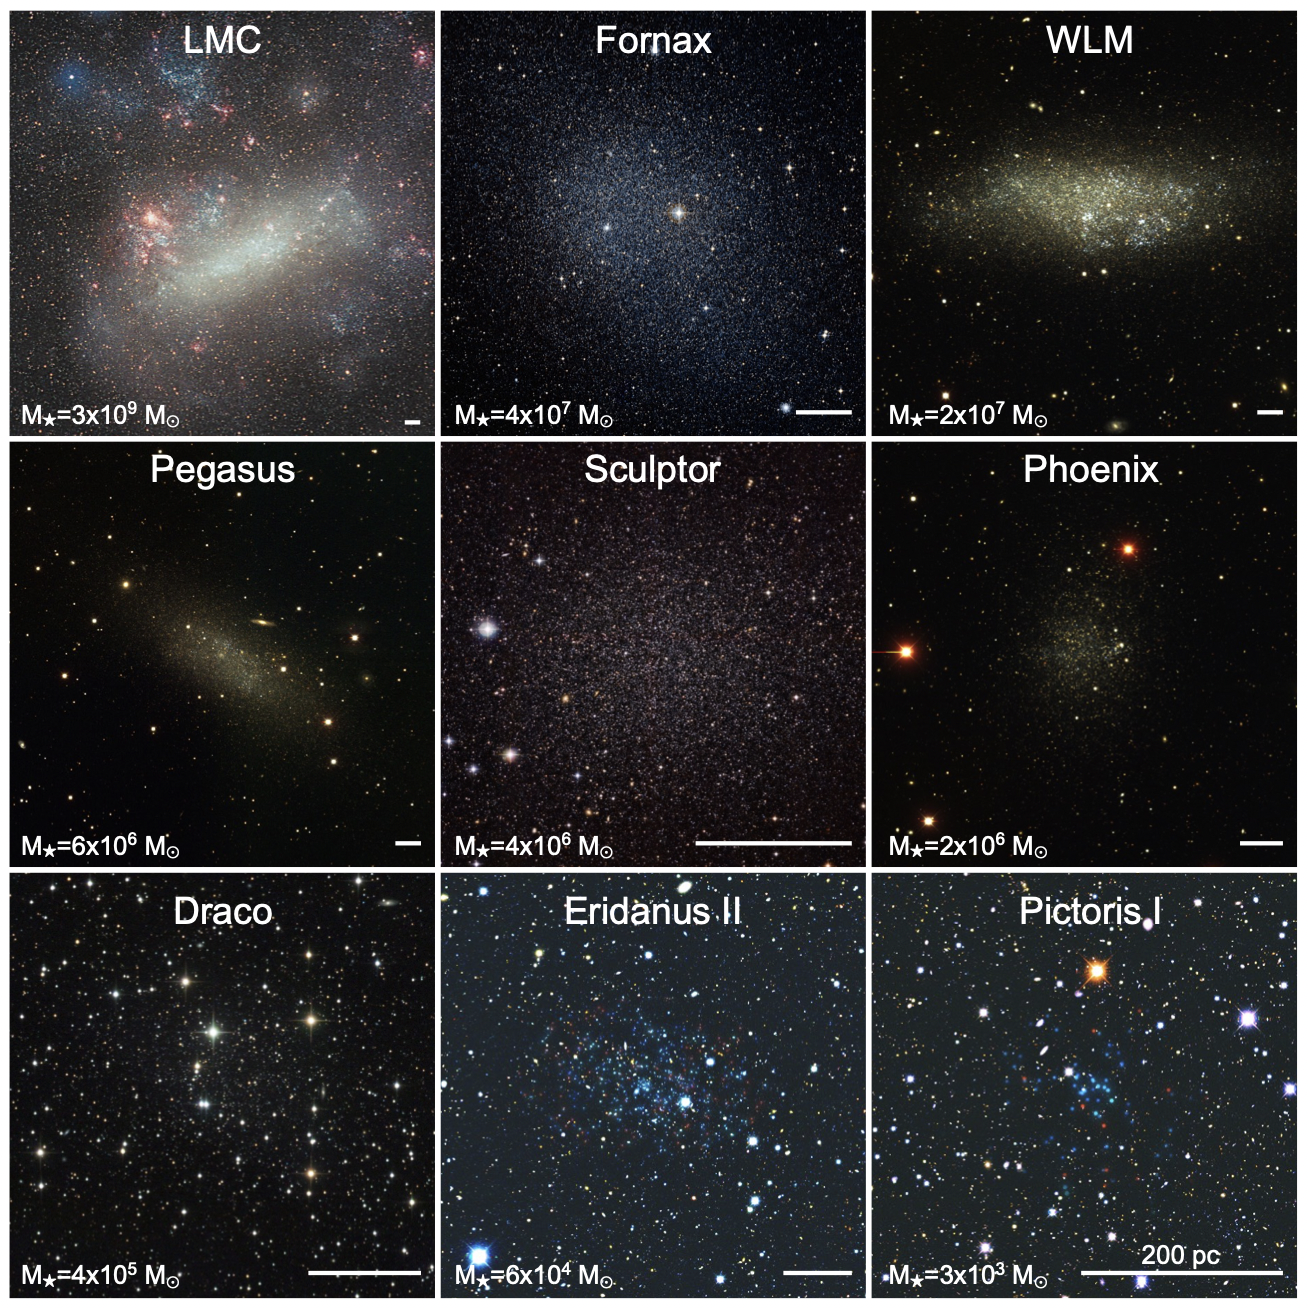 Nine small galaxies of various sizes and shapes are depicted. In the background of each image you can see scattered stars.